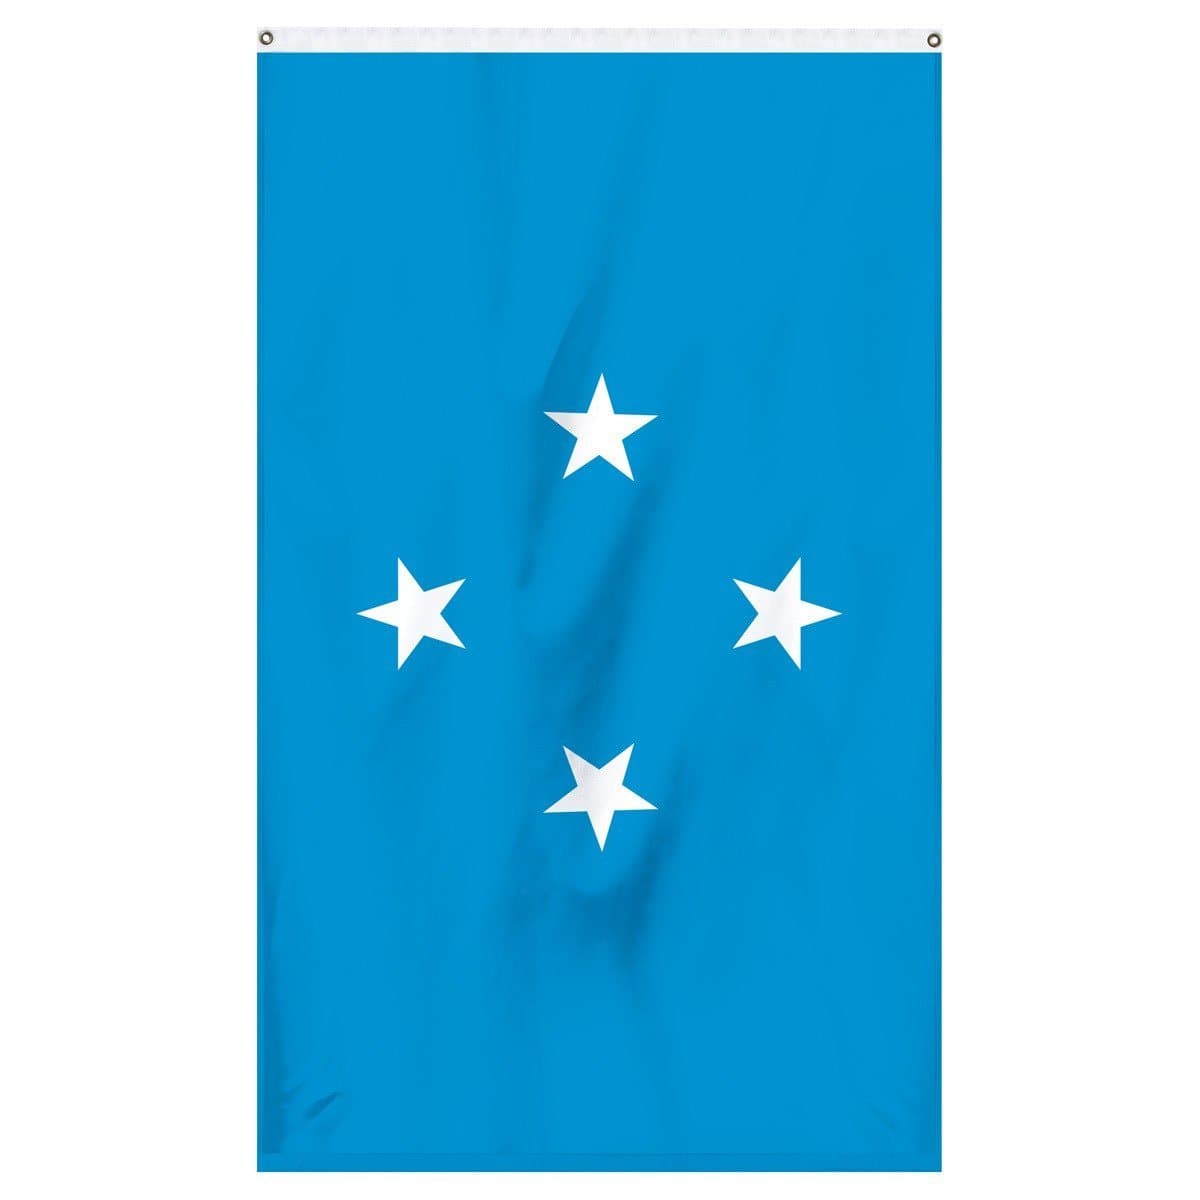 Micronesia national flag for sale to buy online now